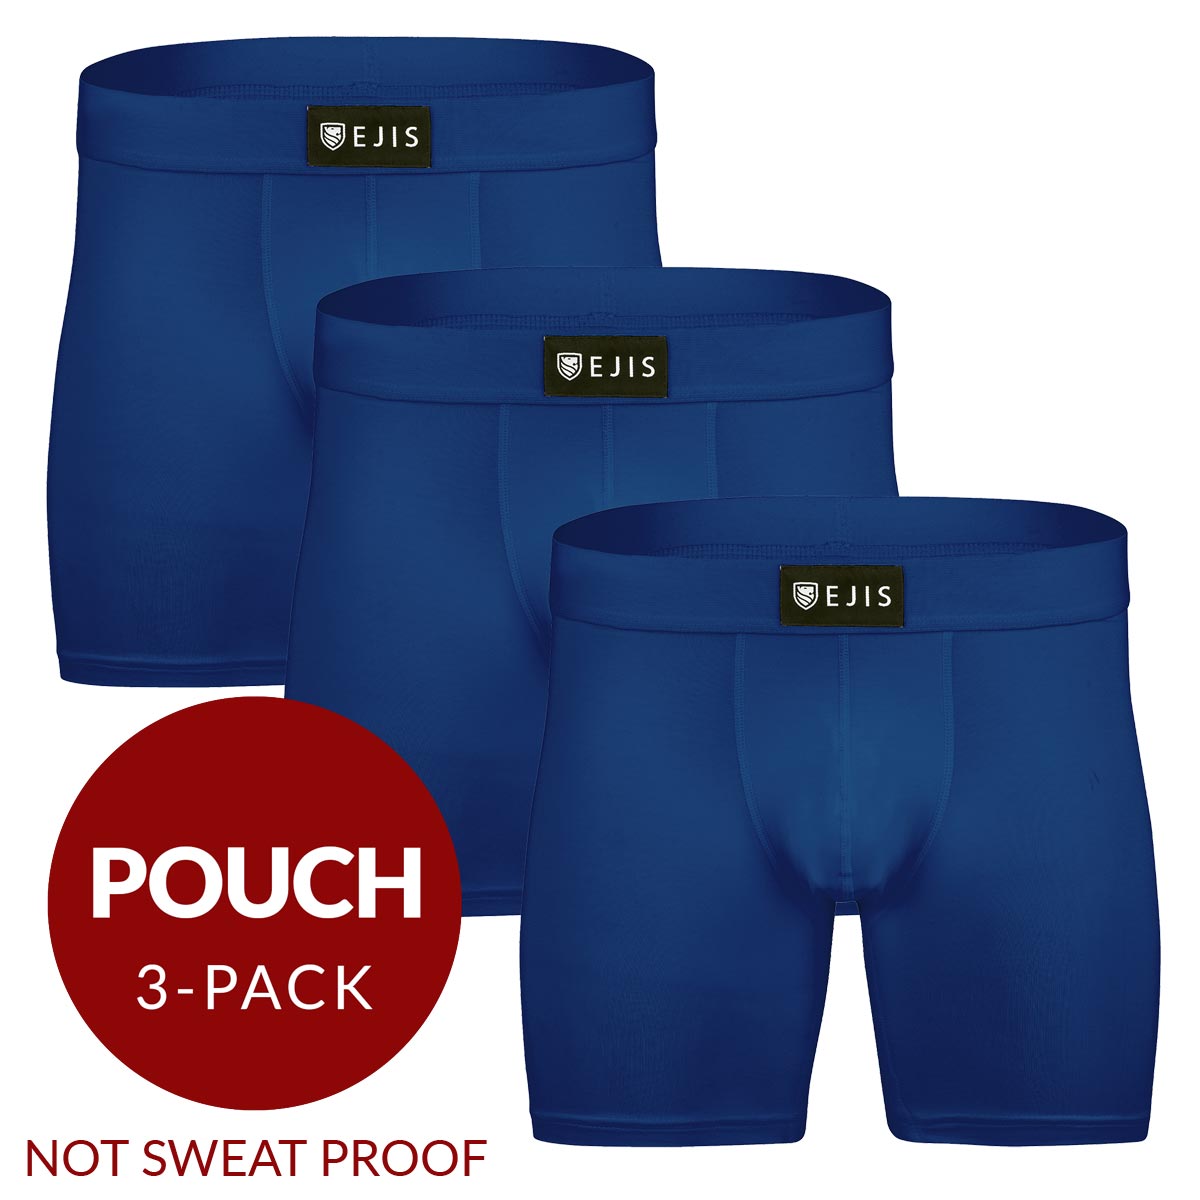 Essential Men's Boxer Briefs with Pouch - Navy 3-Pack - Ejis